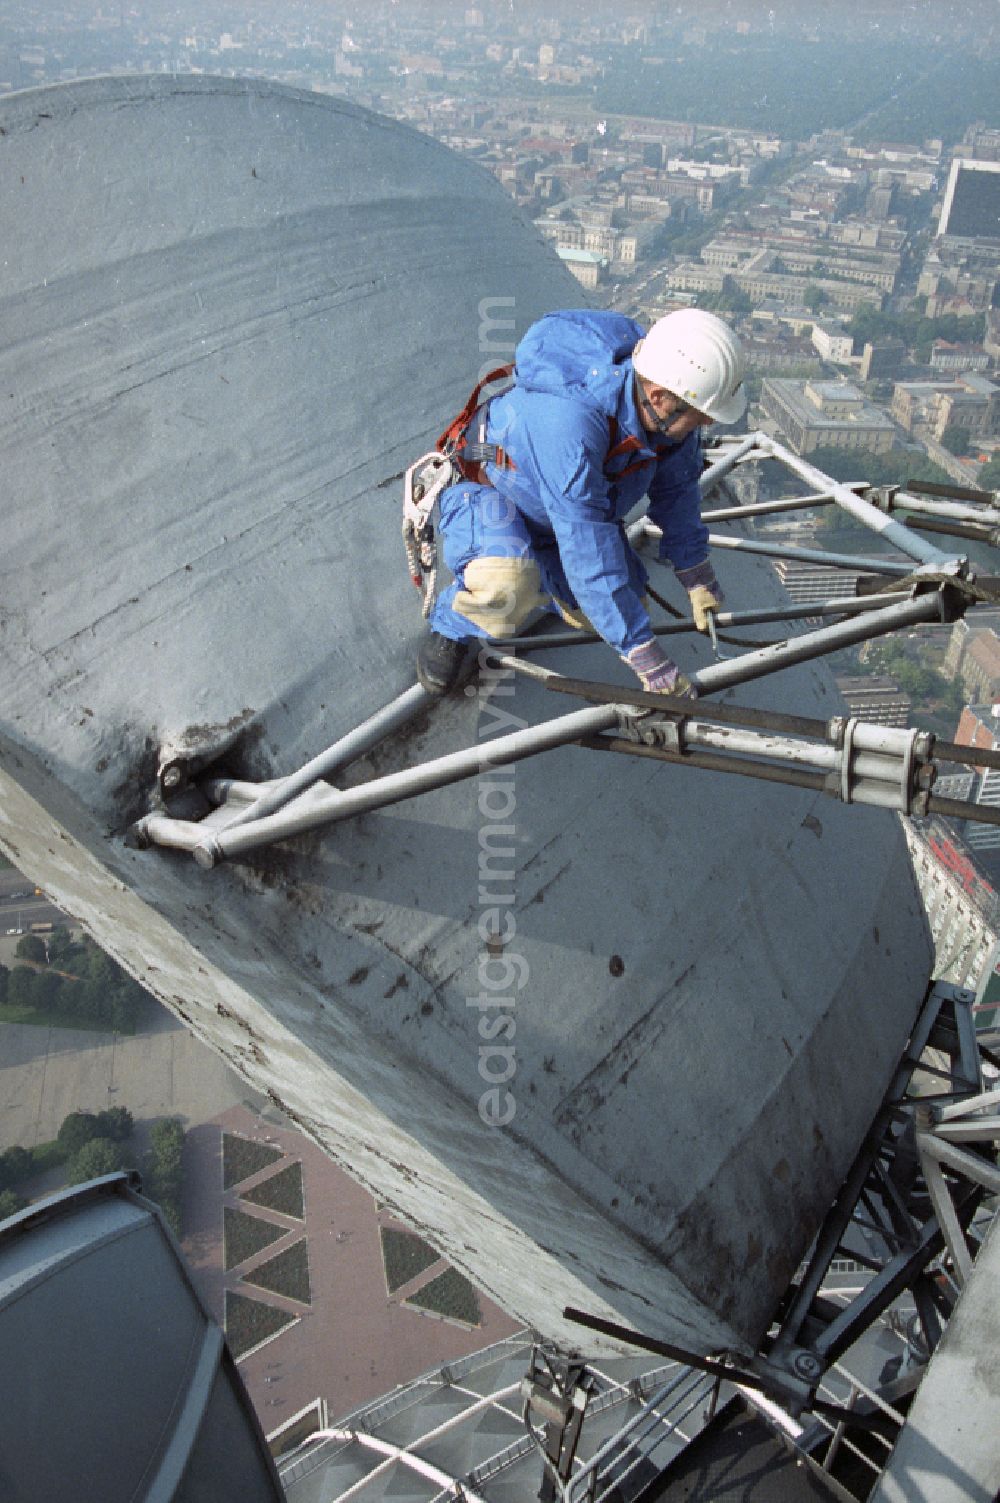 GDR image archive: Berlin - Technicians during maintenance and repair work during external work on the antenna support of the Berlin TV tower in the Mitte district of Berlin East Berlin